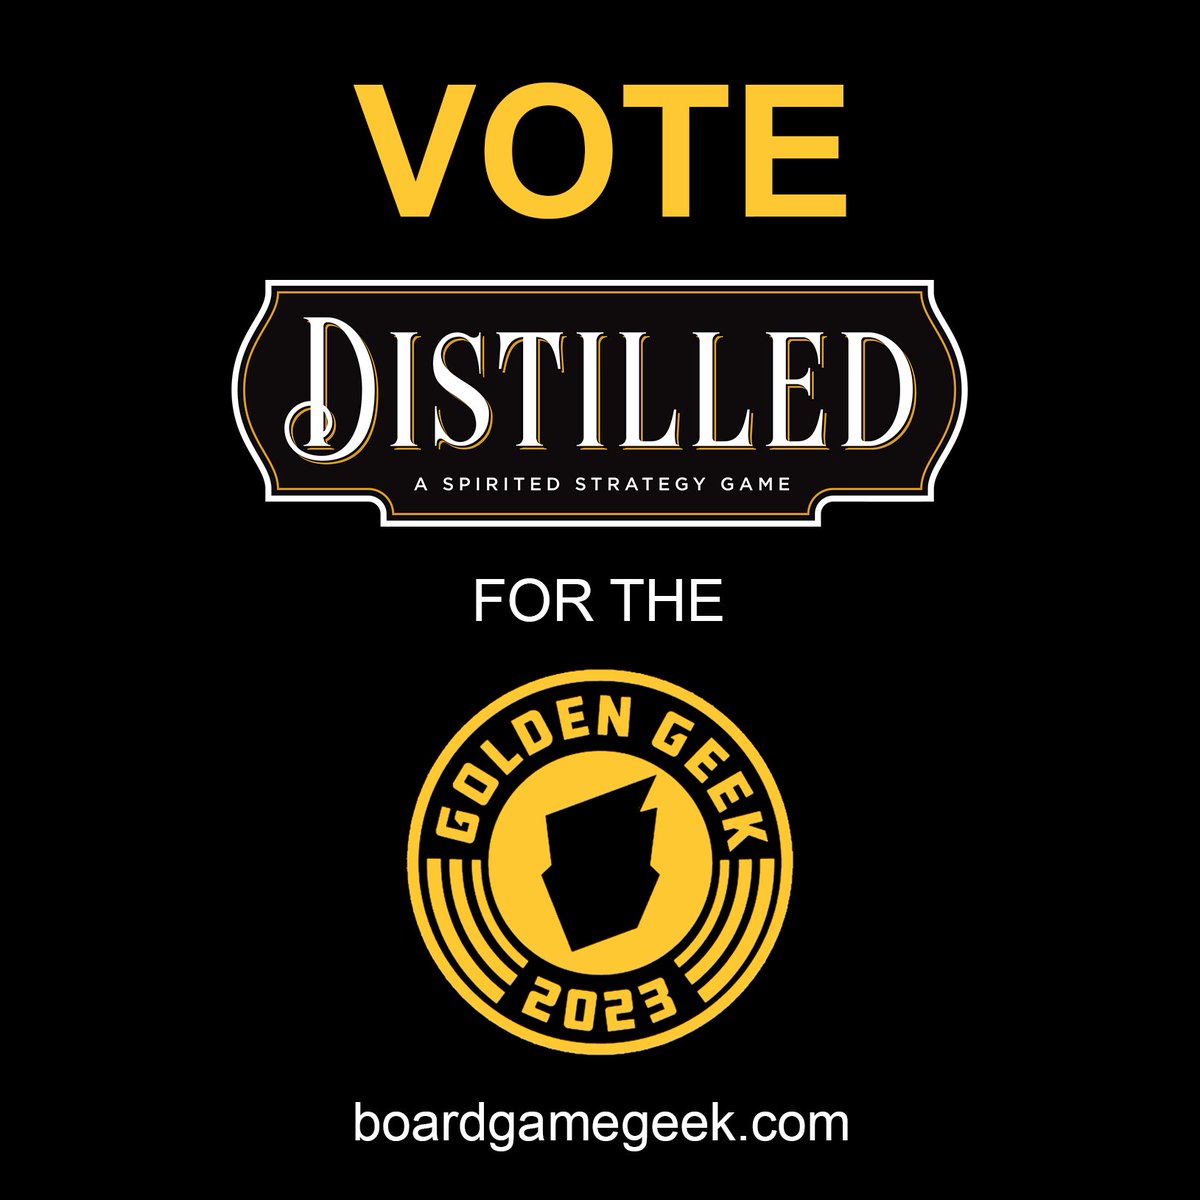 Have you voted on #boardgamegeek yet? @distilled_game is up for multiple awards this year!  boardgamegeek.com/thread/3288794… 🥃🗳 #distilled #distilledgame #paversongames #whiskey #whisky #boardgaming #boardgames #bgg #boardgame #tabletop #gamenight #boardgamer  #geek